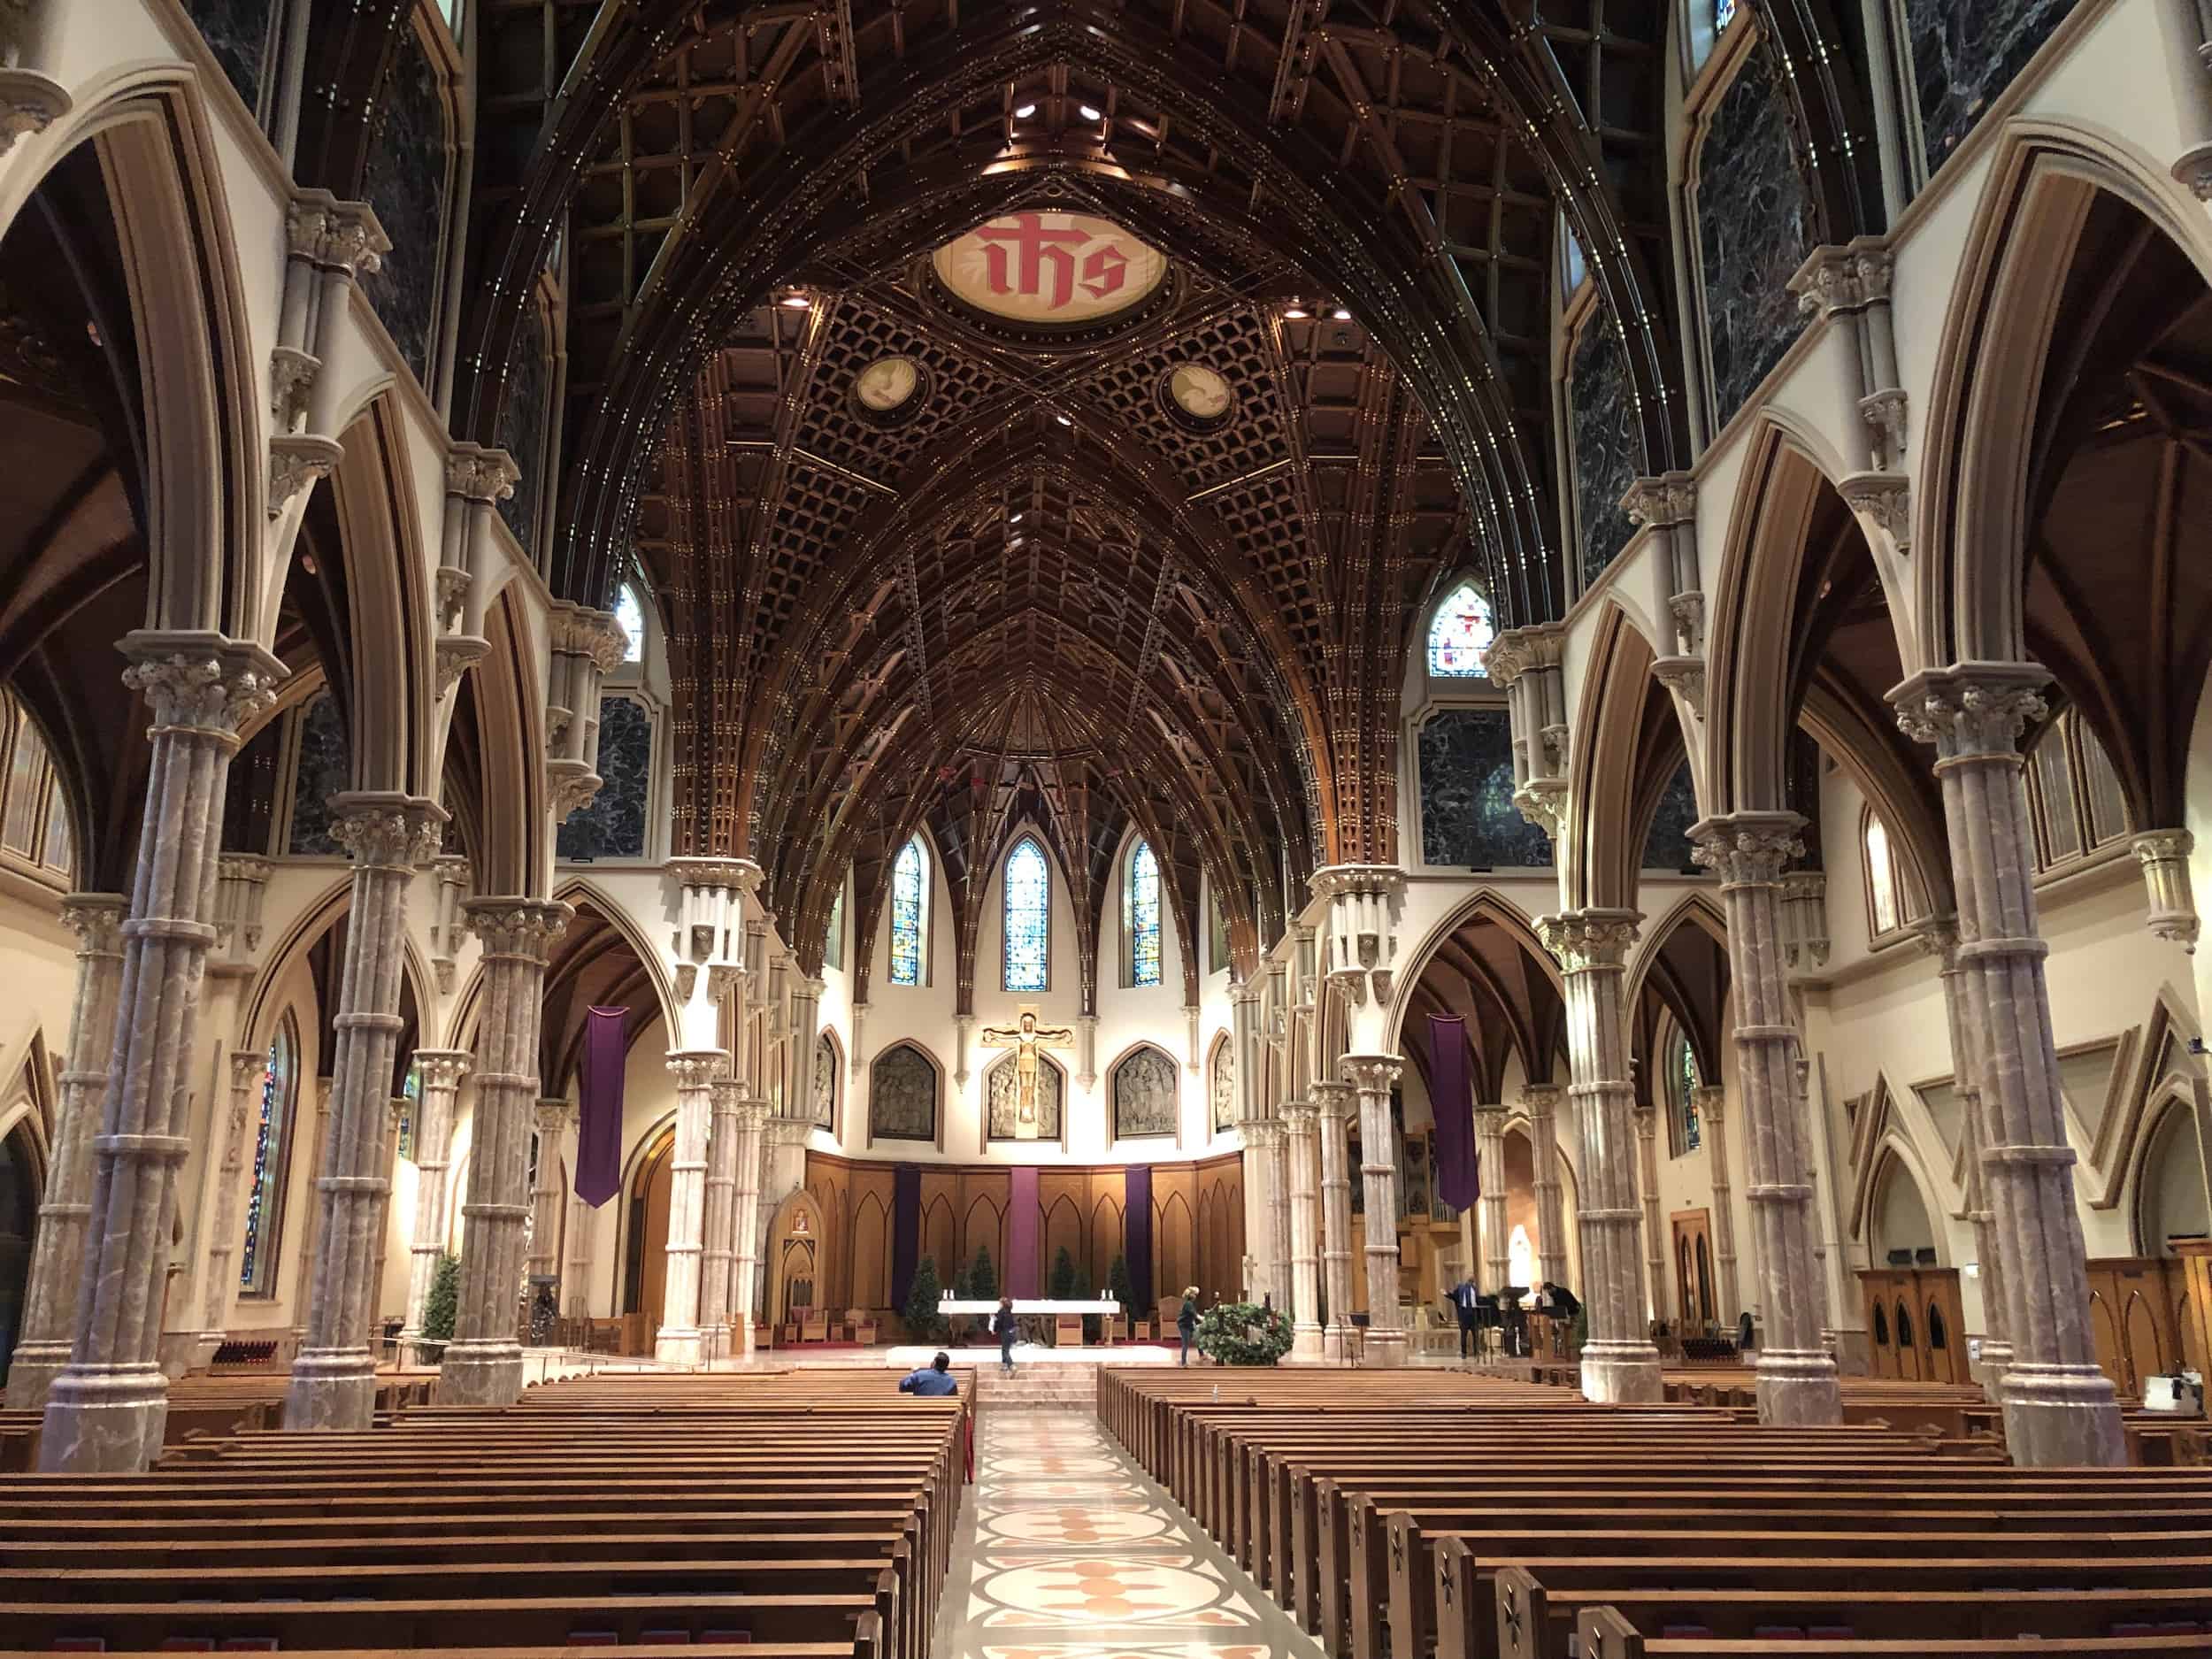 Holy Name Cathedral in River North, Chicago, Illinois